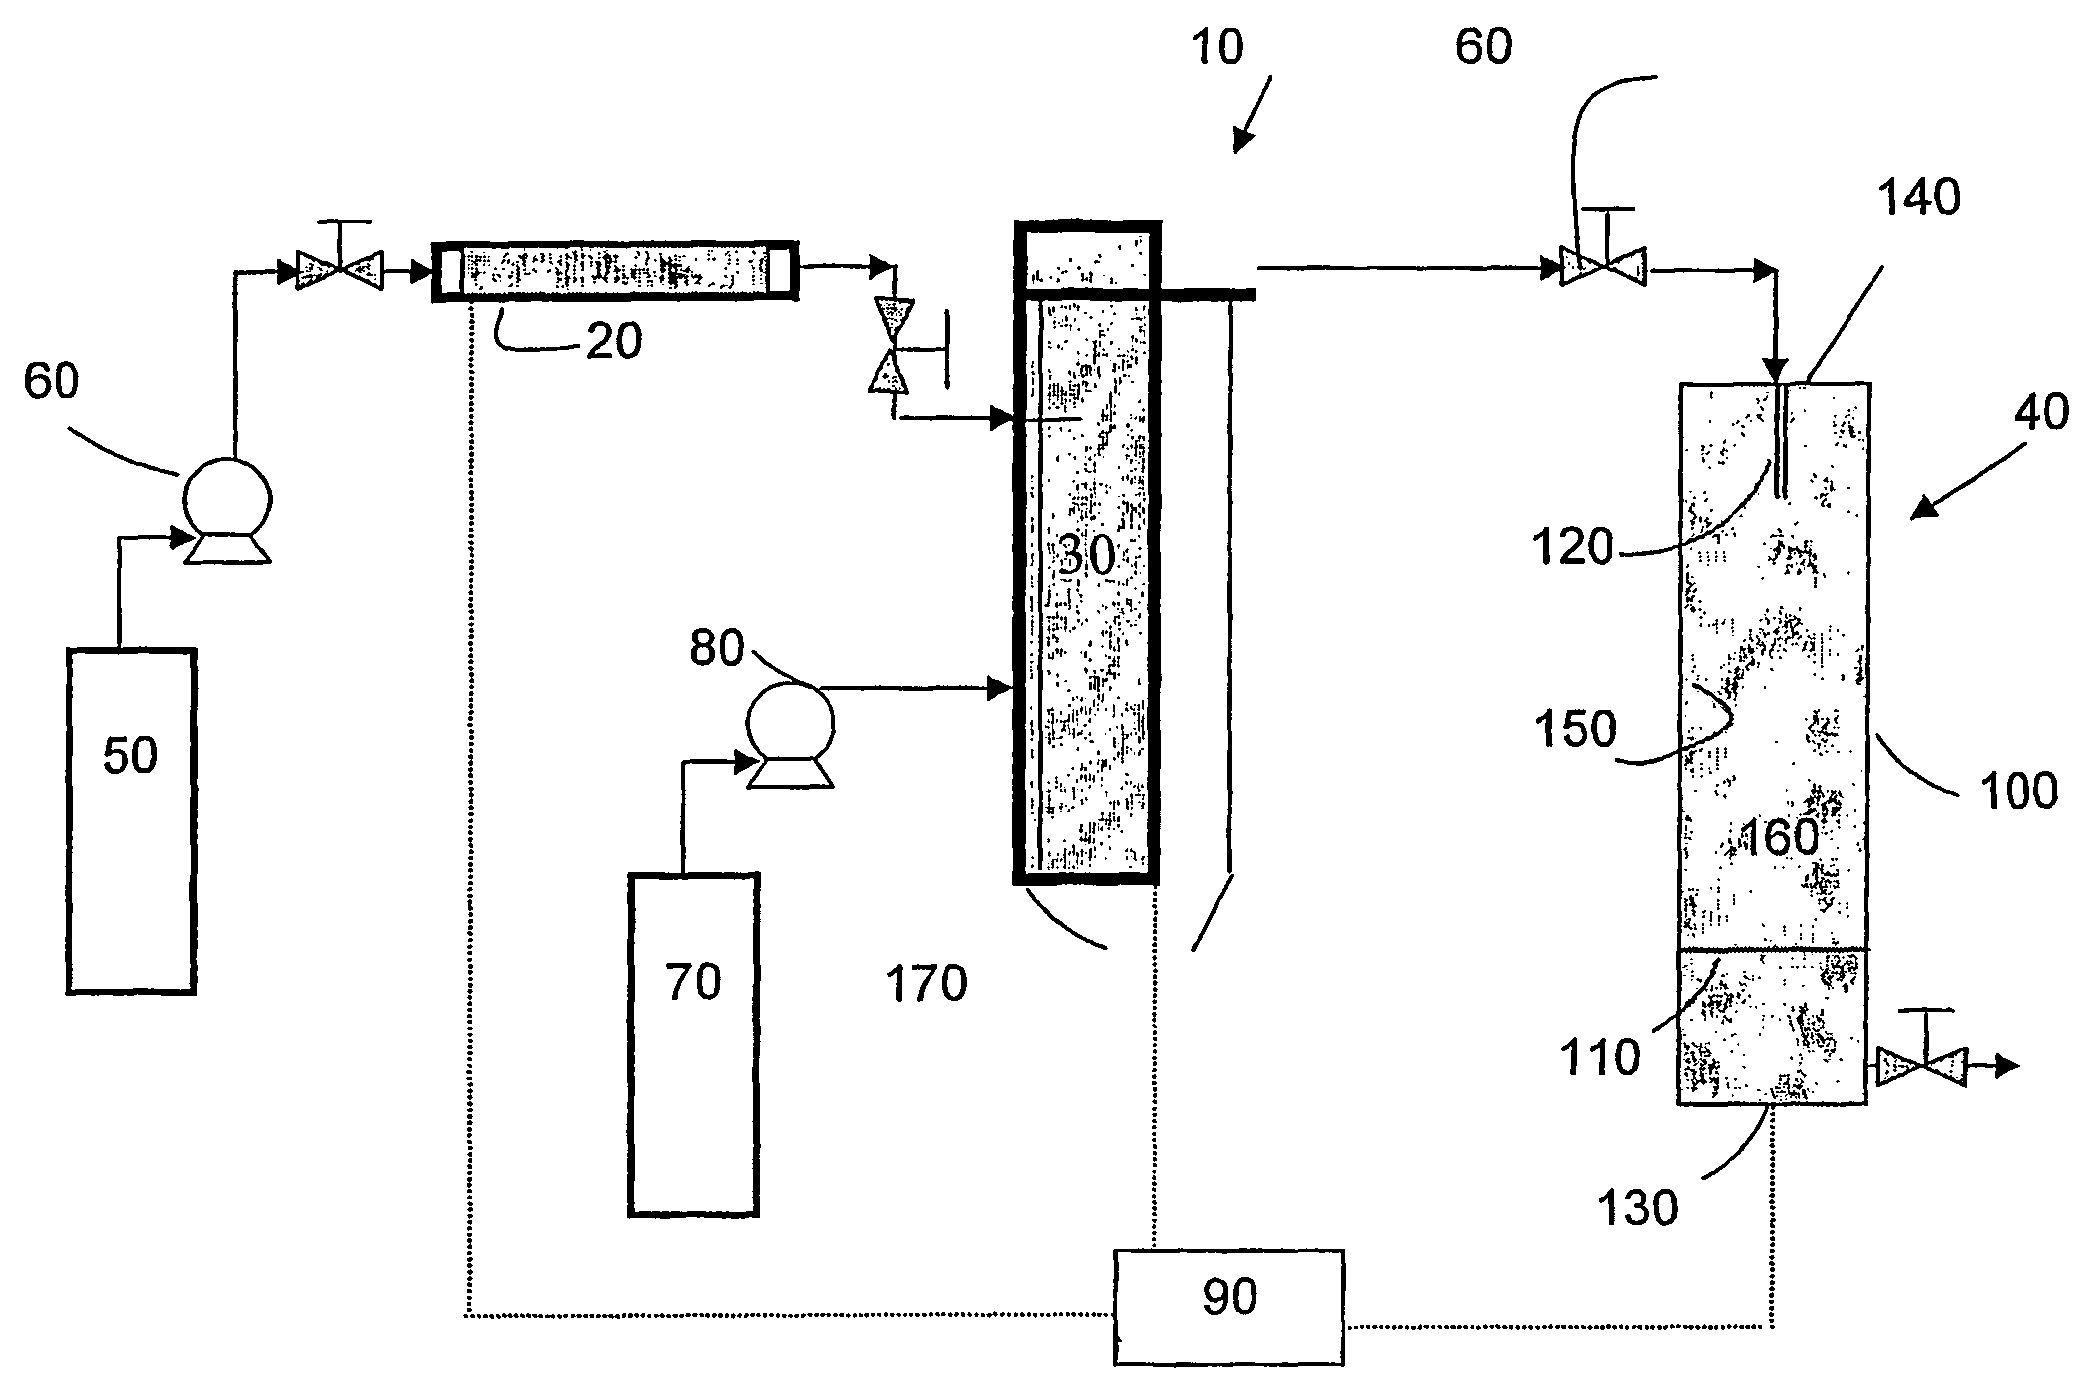 Method for preparation of particles from solution-in-supercritical fluid or compressed gas emulsions